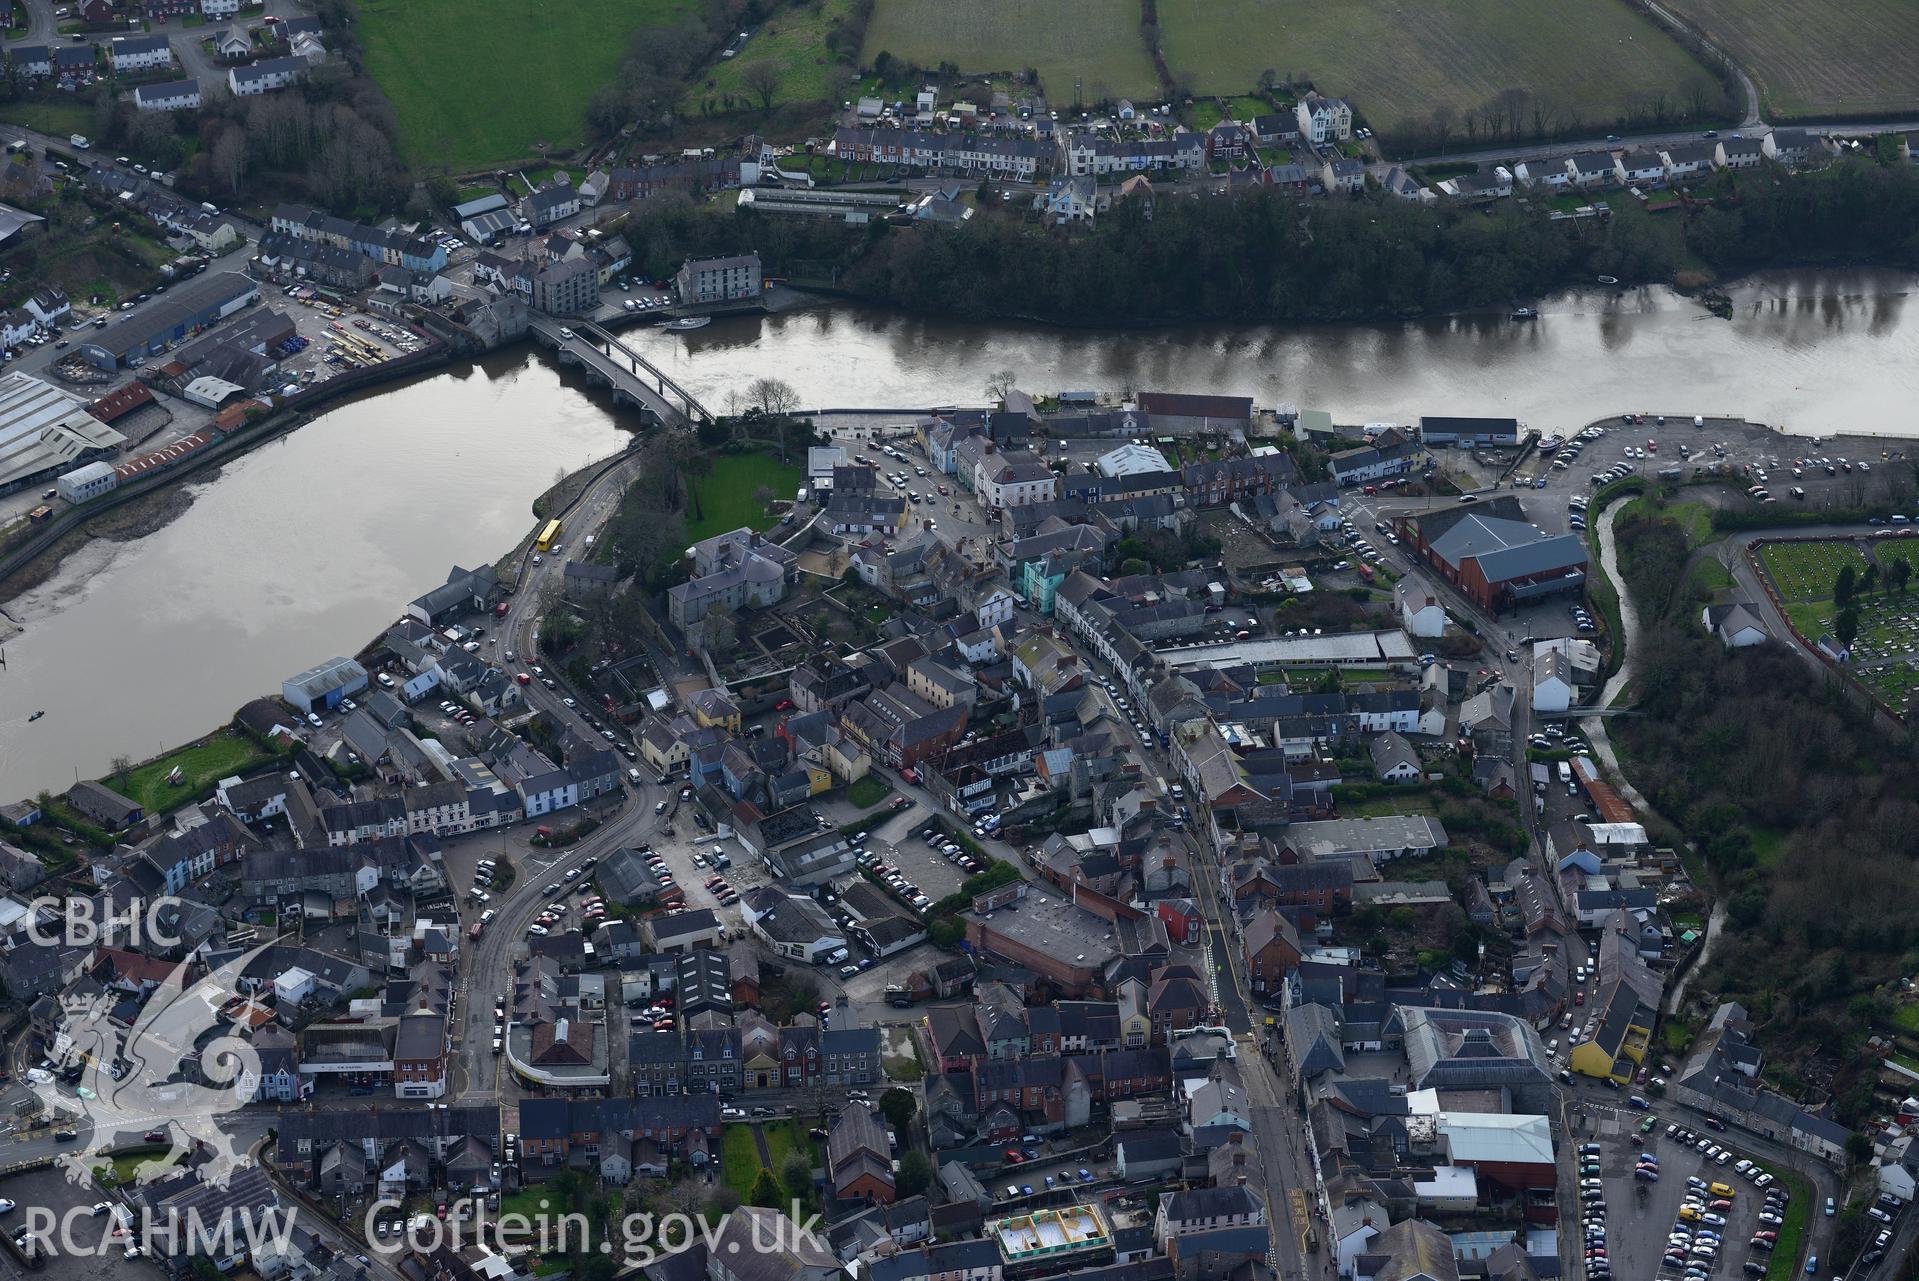 Cardigan Castle and the castle house; Cardigan Bridge and the market hall, Cardigan. Oblique aerial photograph taken during the Royal Commission's programme of archaeological aerial reconnaissance by Toby Driver on 13th March 2015.